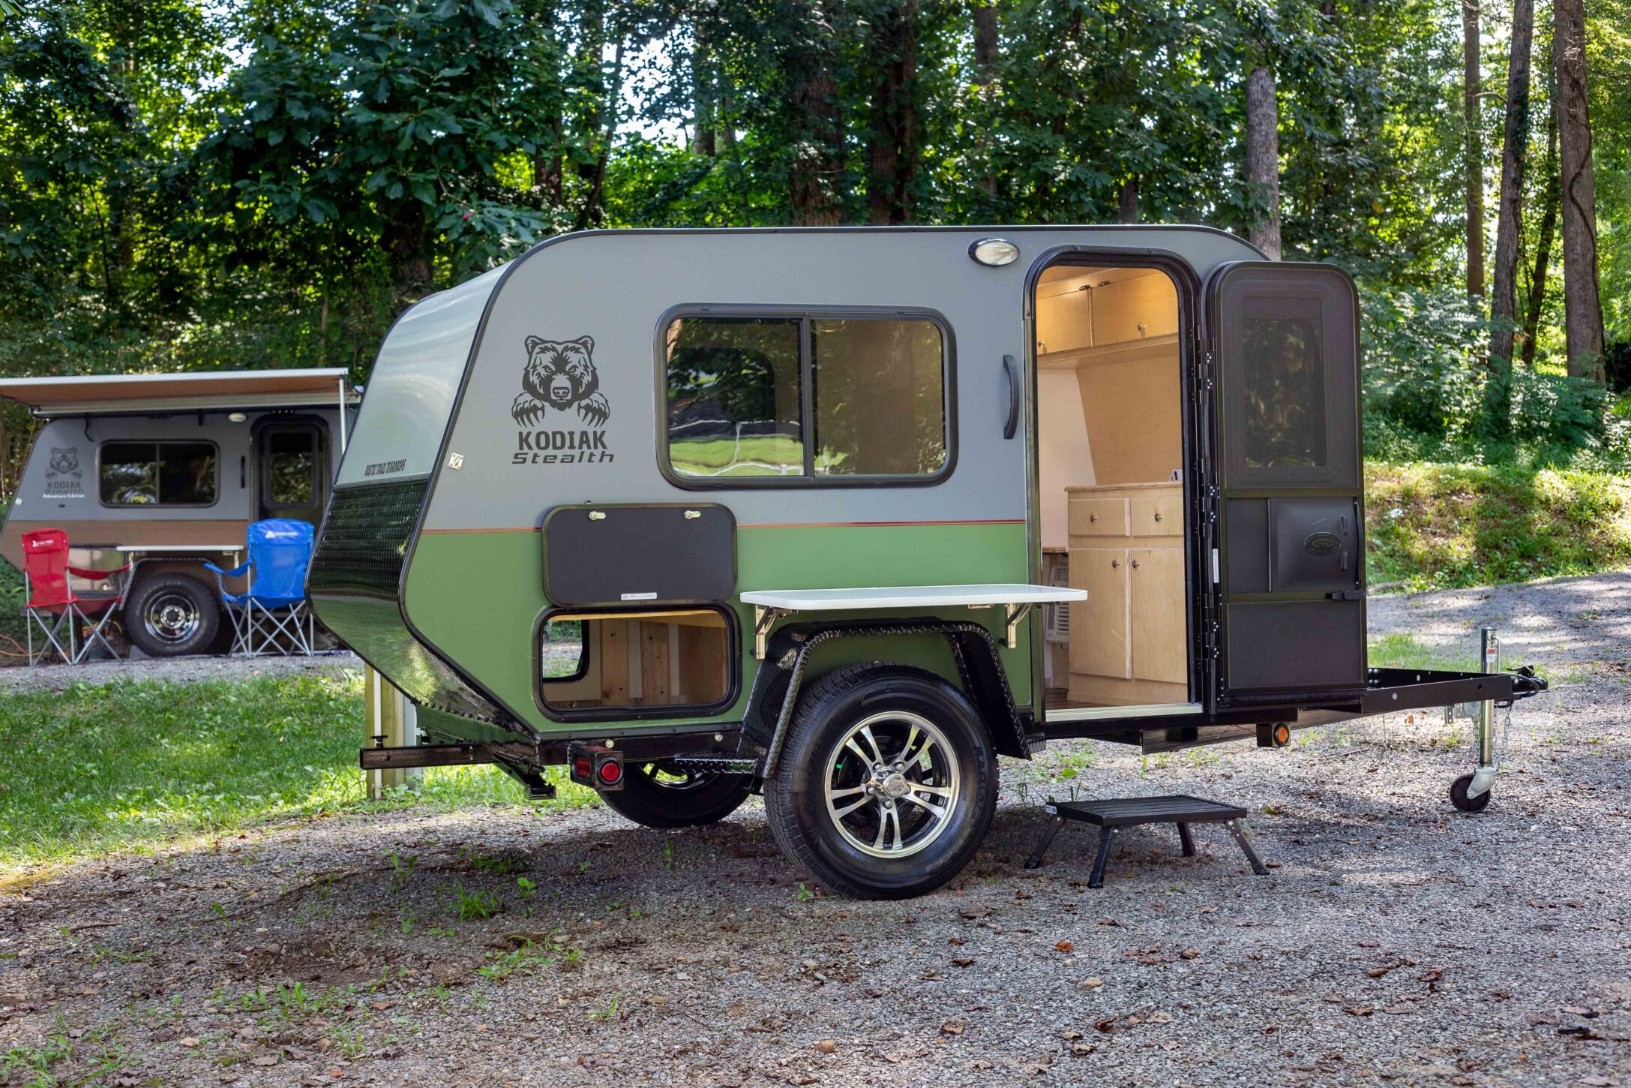 Kodiak Stealth Teardrop Camper Offers The Most Bang For The Least Buck 6 